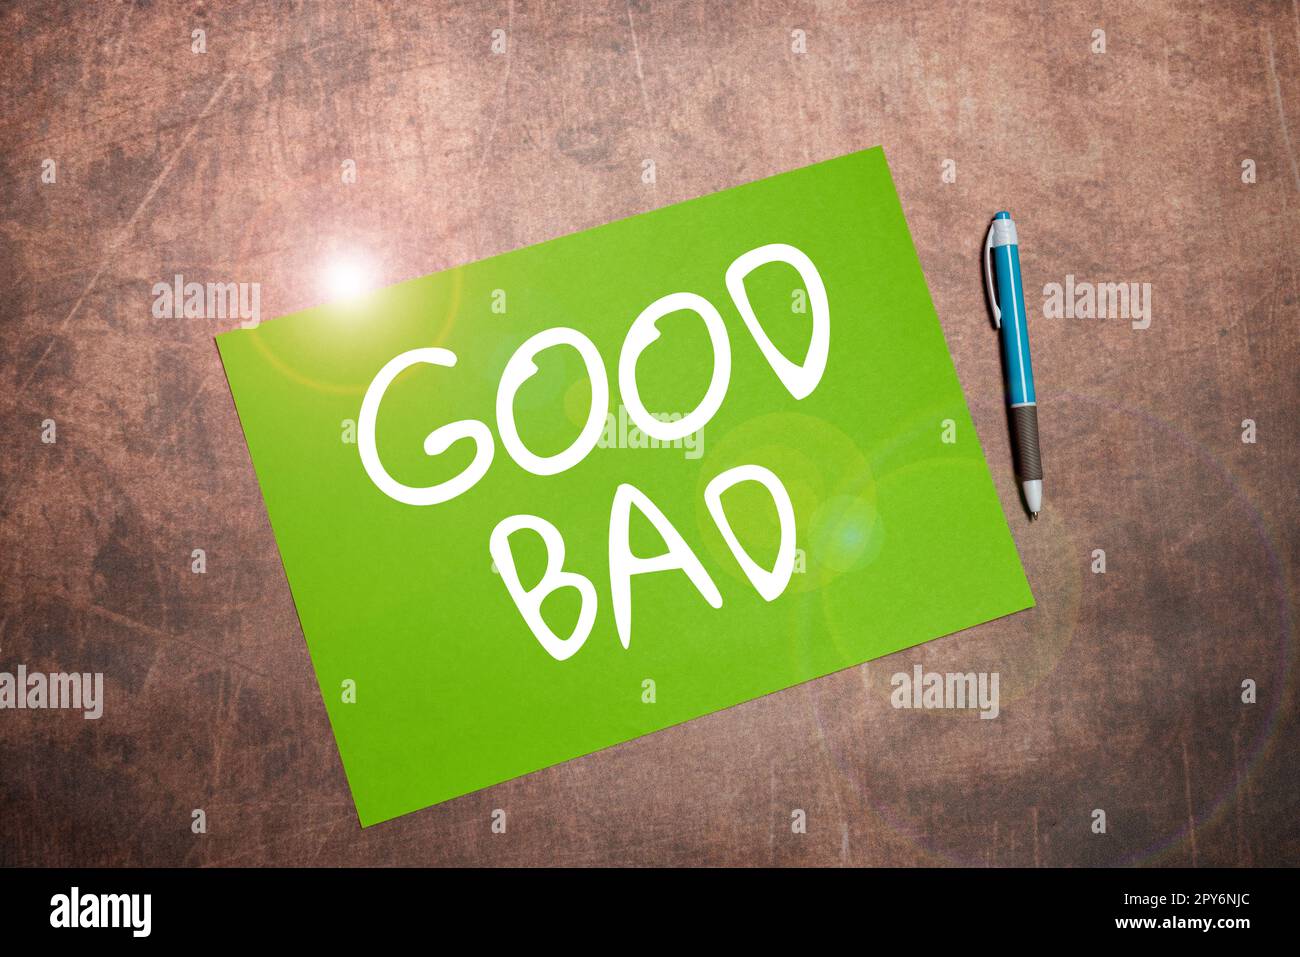 https://c8.alamy.com/comp/2PY6NJC/writing-displaying-text-good-bad-business-concept-to-seem-to-be-going-to-have-a-good-or-bad-result-life-choices-2PY6NJC.jpg